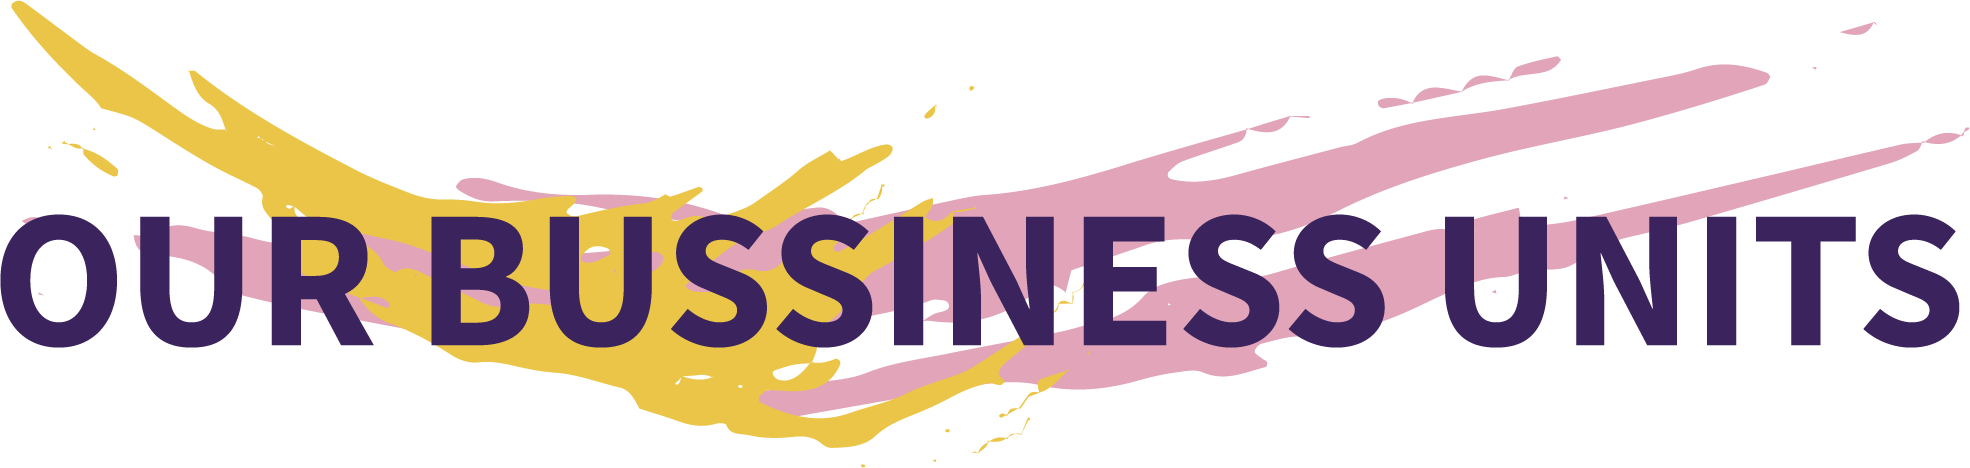 Bussiness units